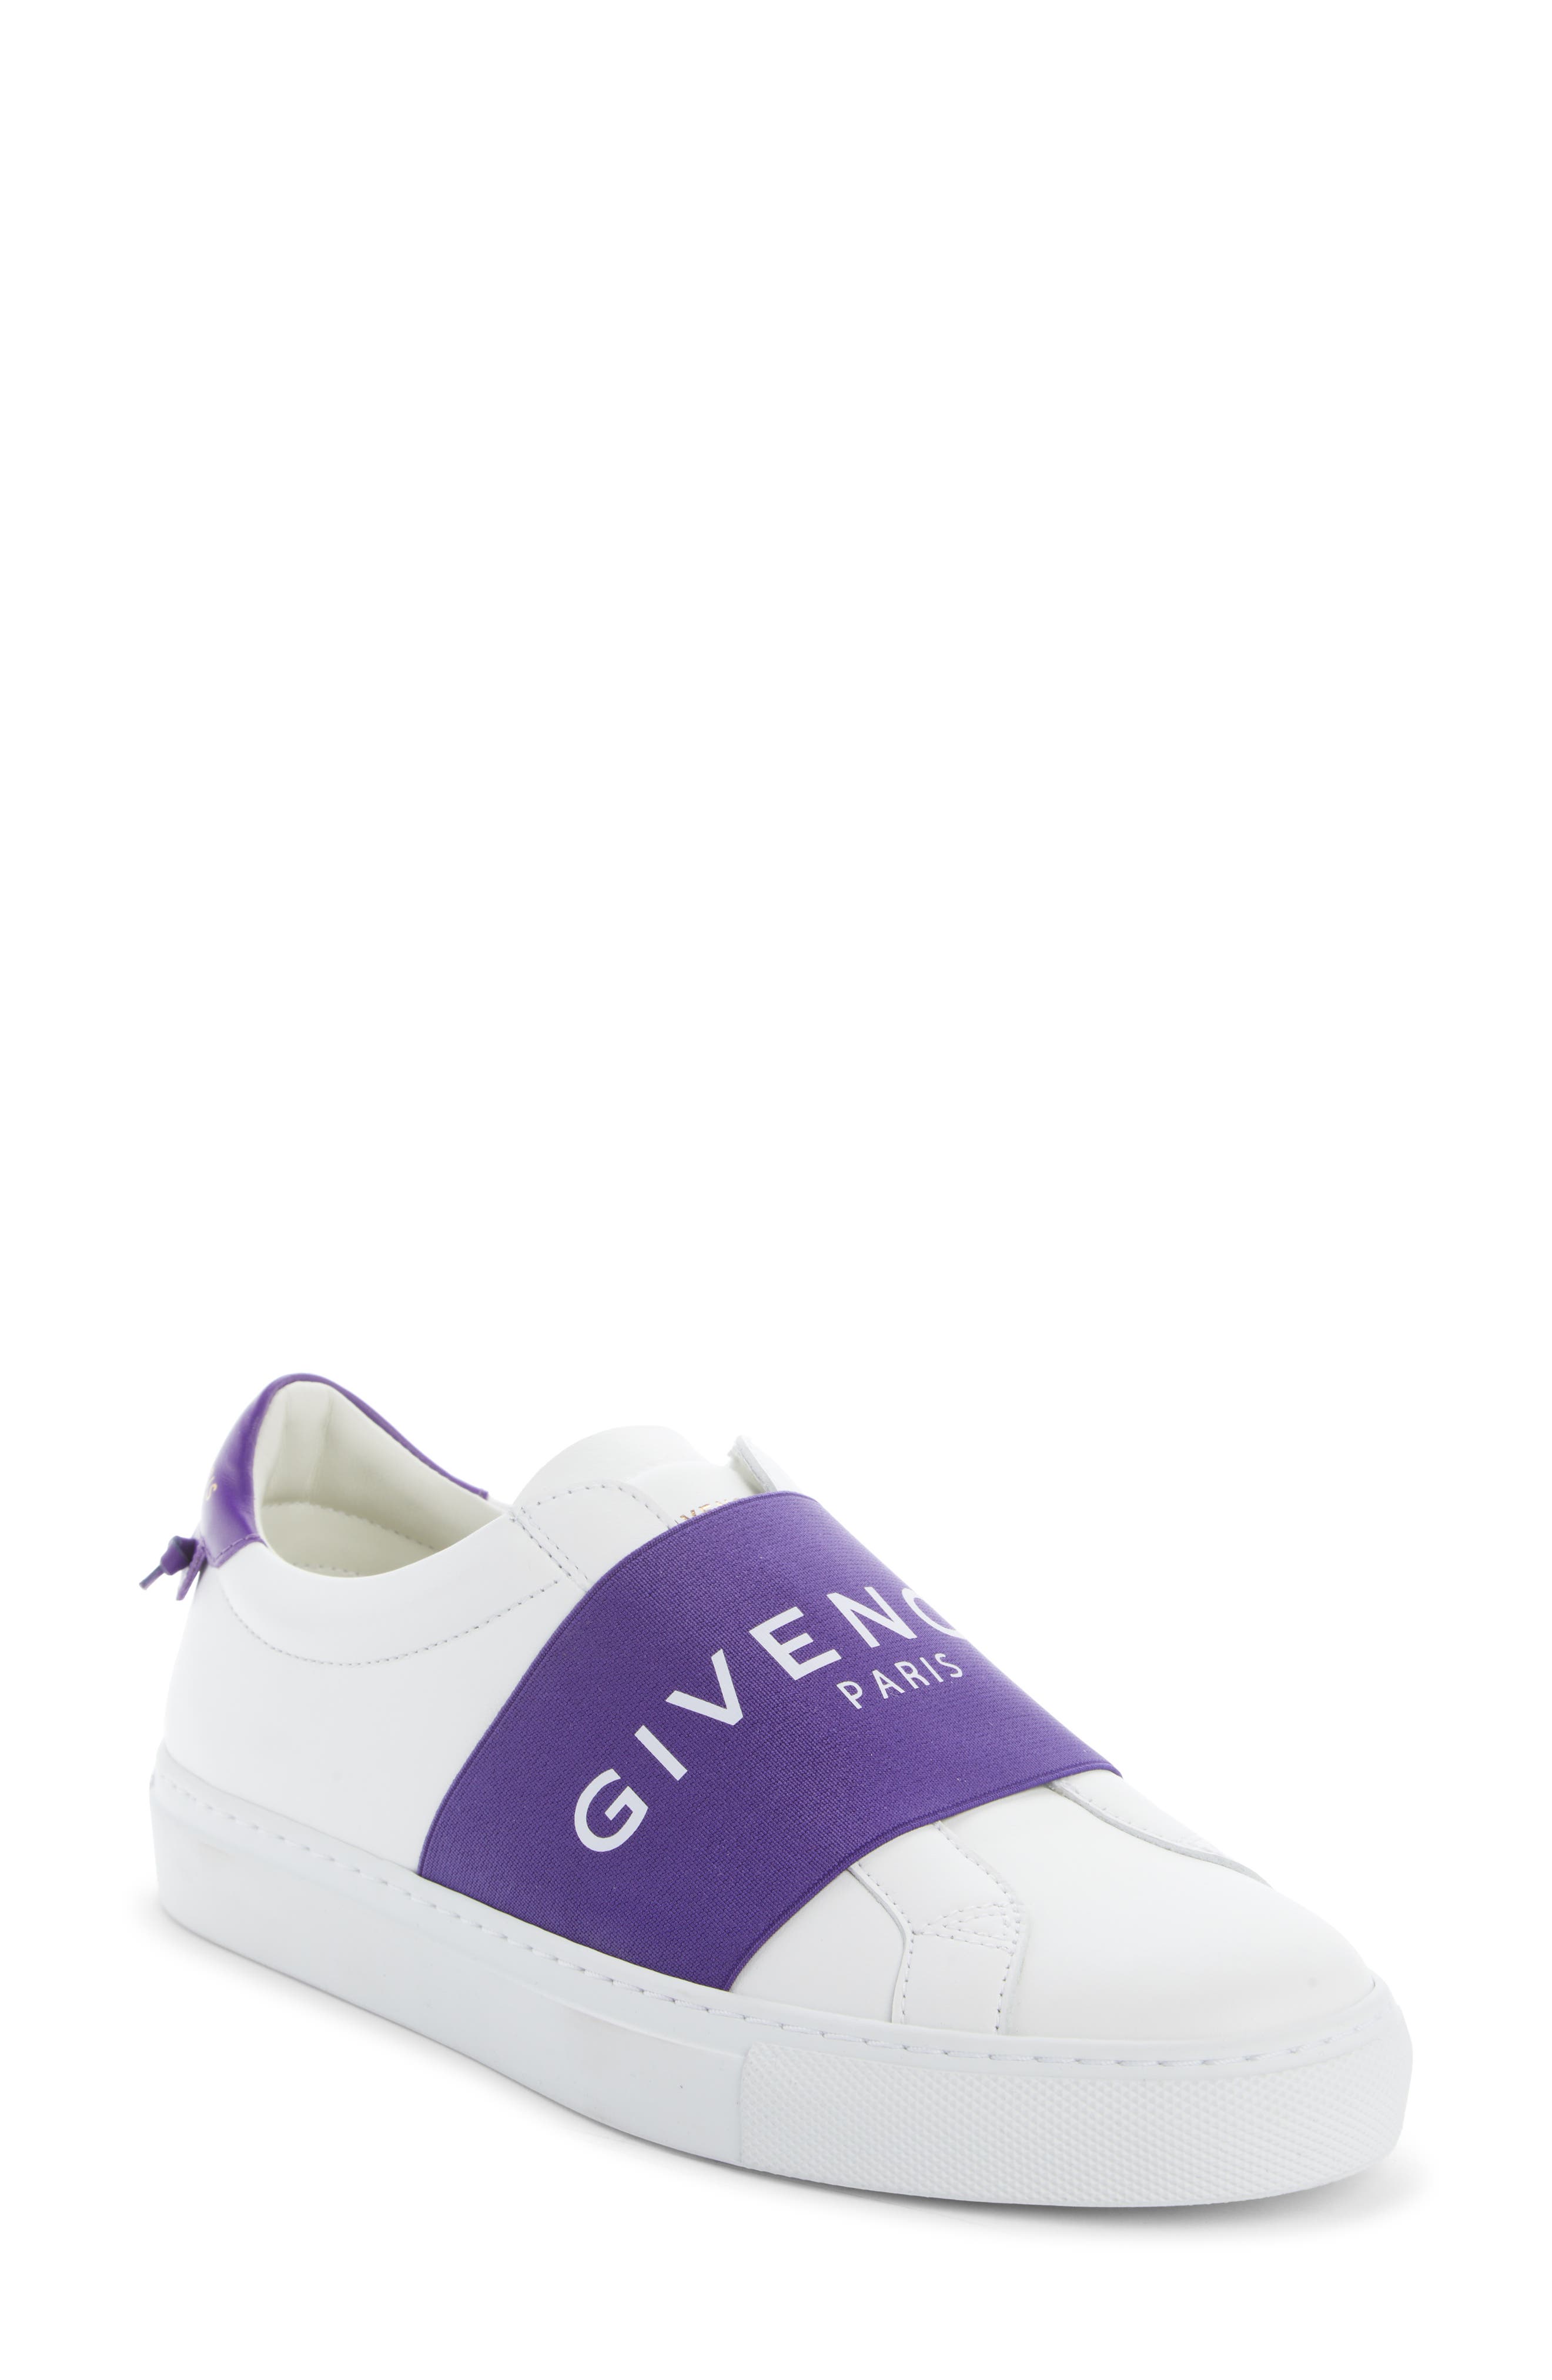 givenchy shoes nordstrom